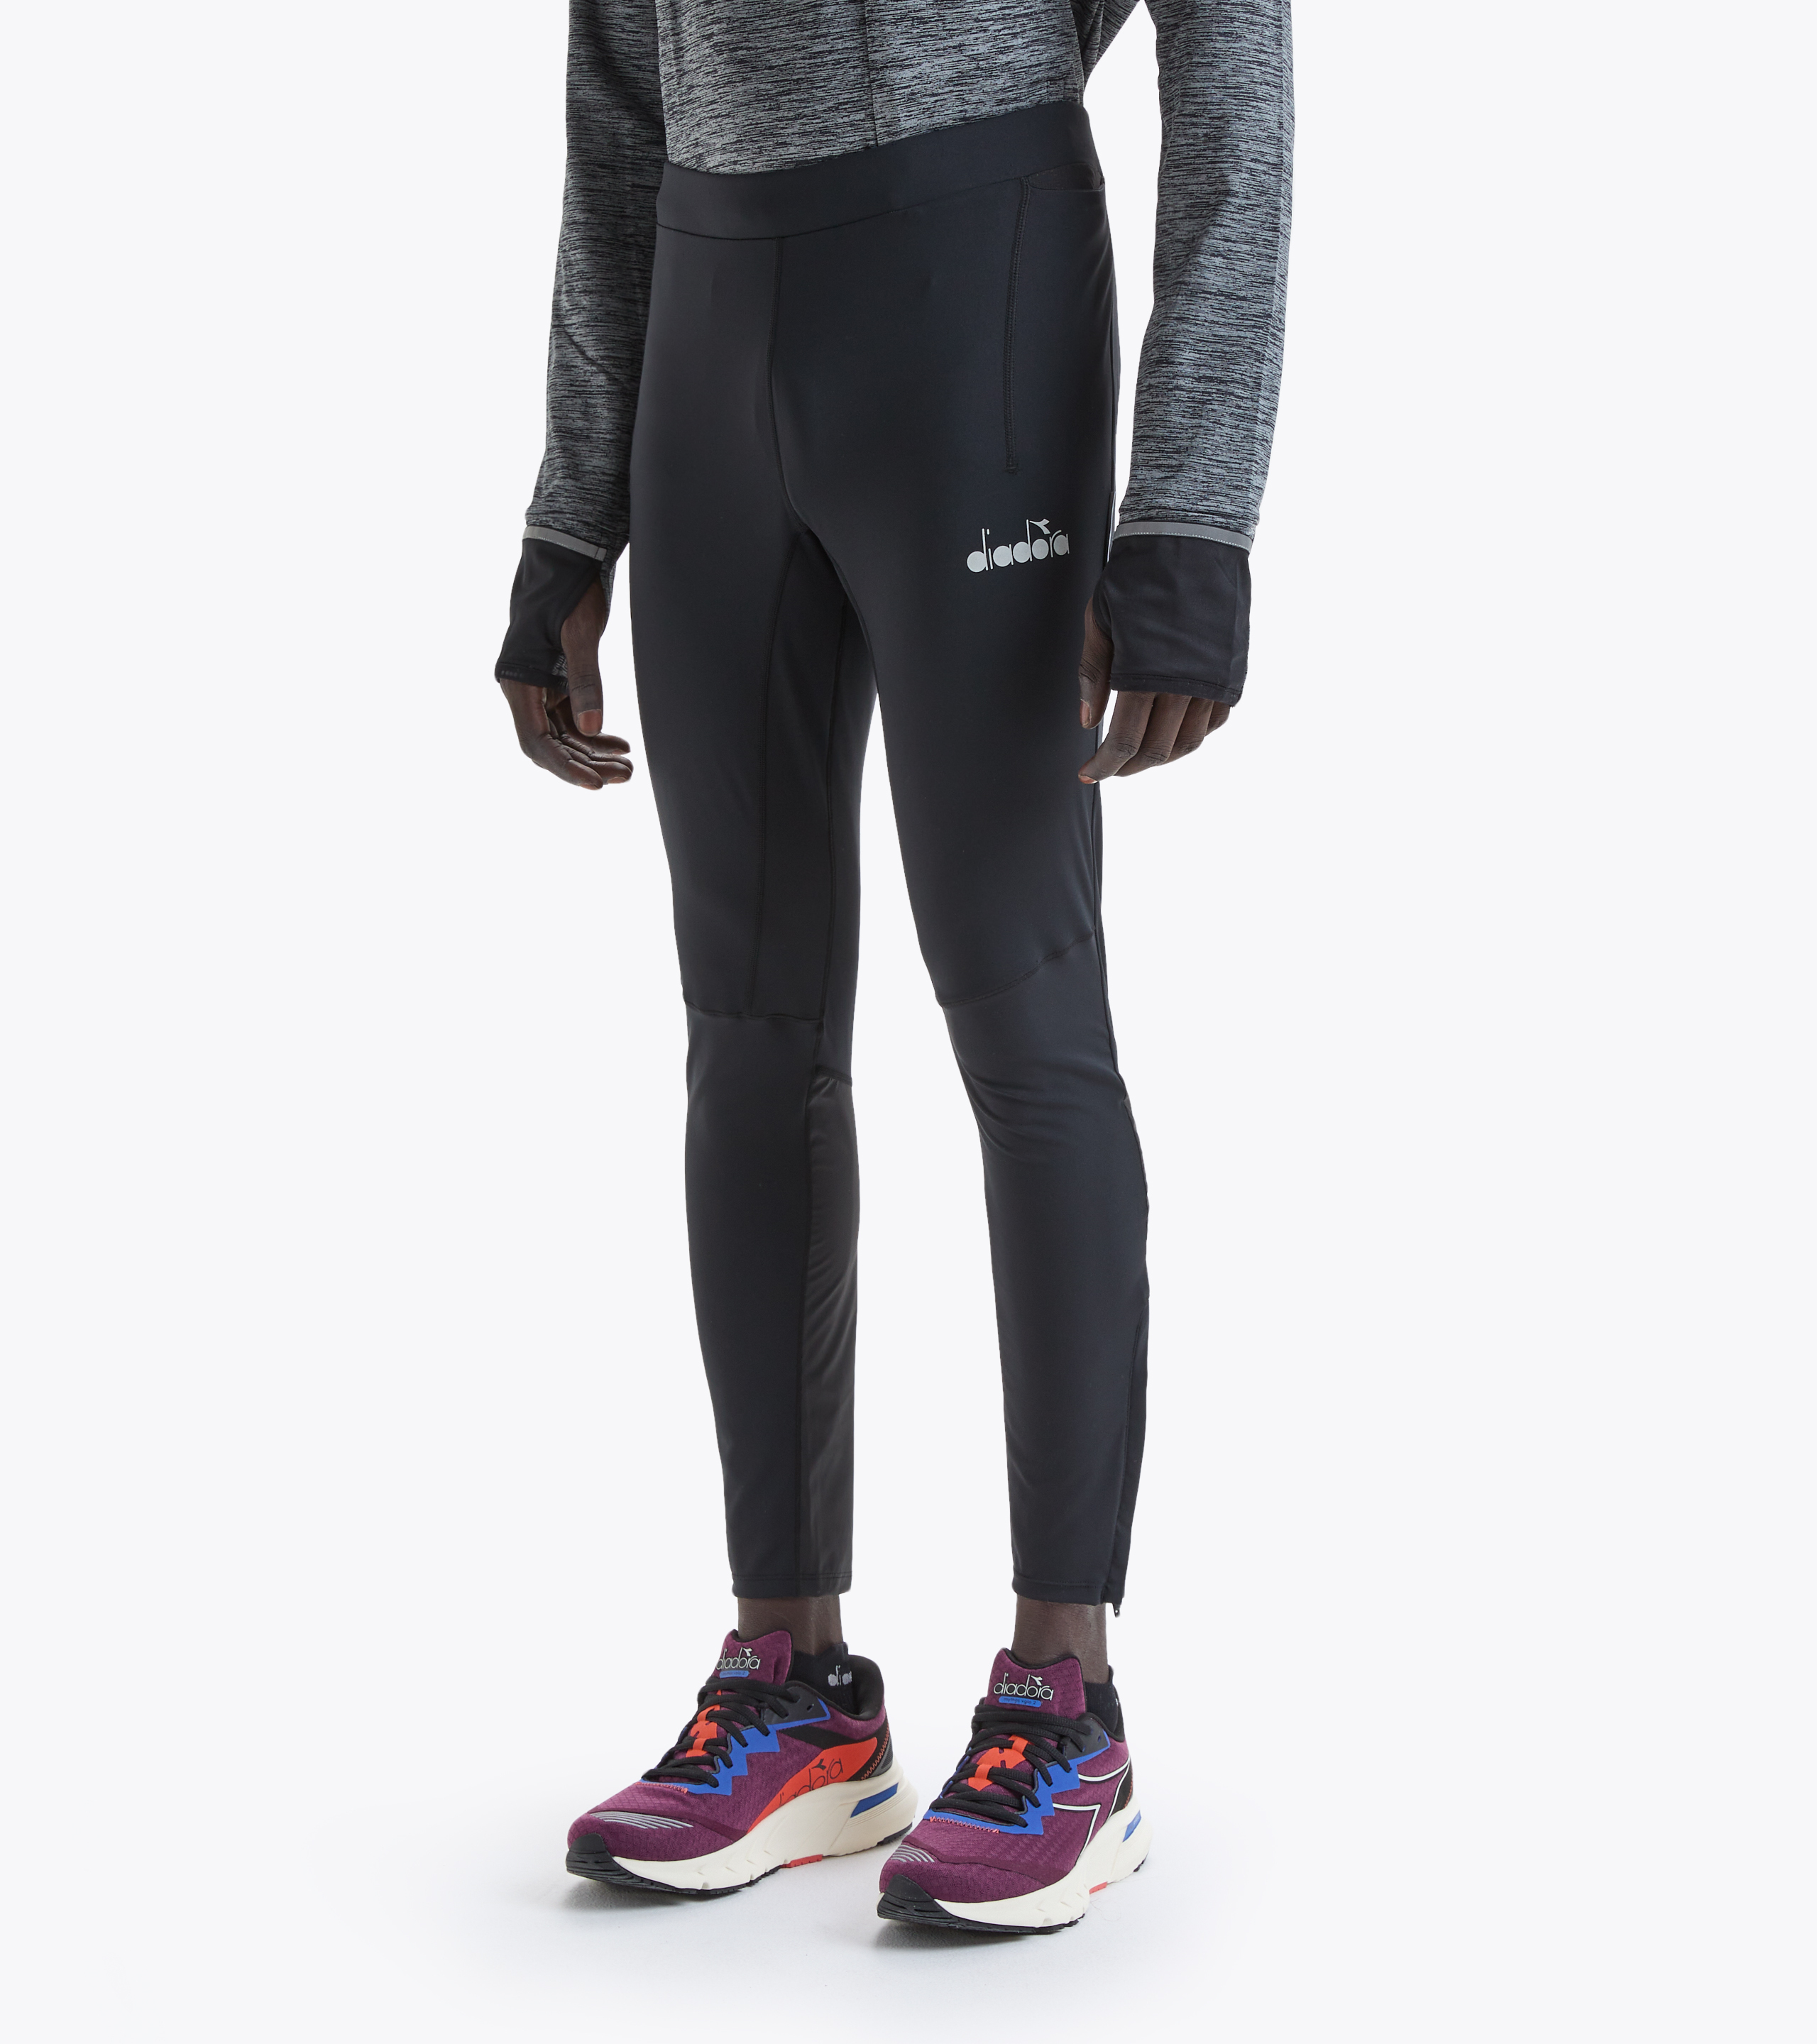 L. 3/4 REVERSIBLE TIGHTS BE ONE Double-face leggings - Women - Diadora  Online Store CA